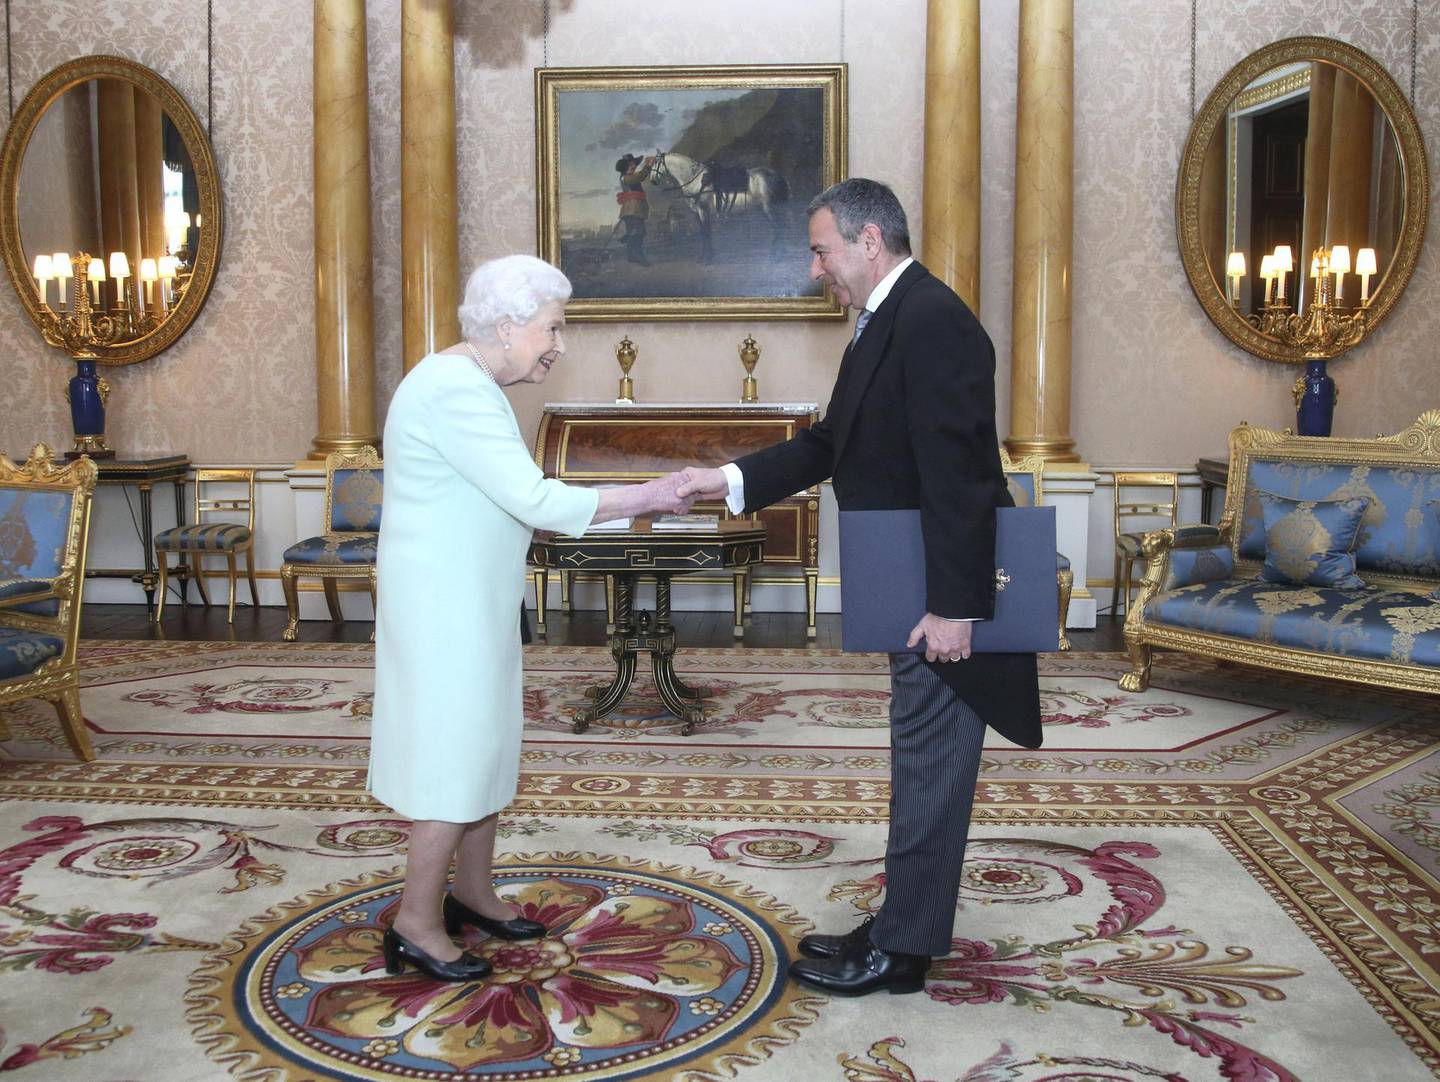 LONDON, UNITED KINGDOM - MARCH 27: His Excellency Tarek Adel is received by Queen Elizabeth II during an audience, when he presented the Letters of Recall of his predecessor and his own Letters of Credence as Ambassador from the Arab Republic of Egypt at Buckingham Palace on March 27, 2019 in London, United Kingdom. (Photo by Yui Mok ‚Äì WPA Pool/Getty Images)